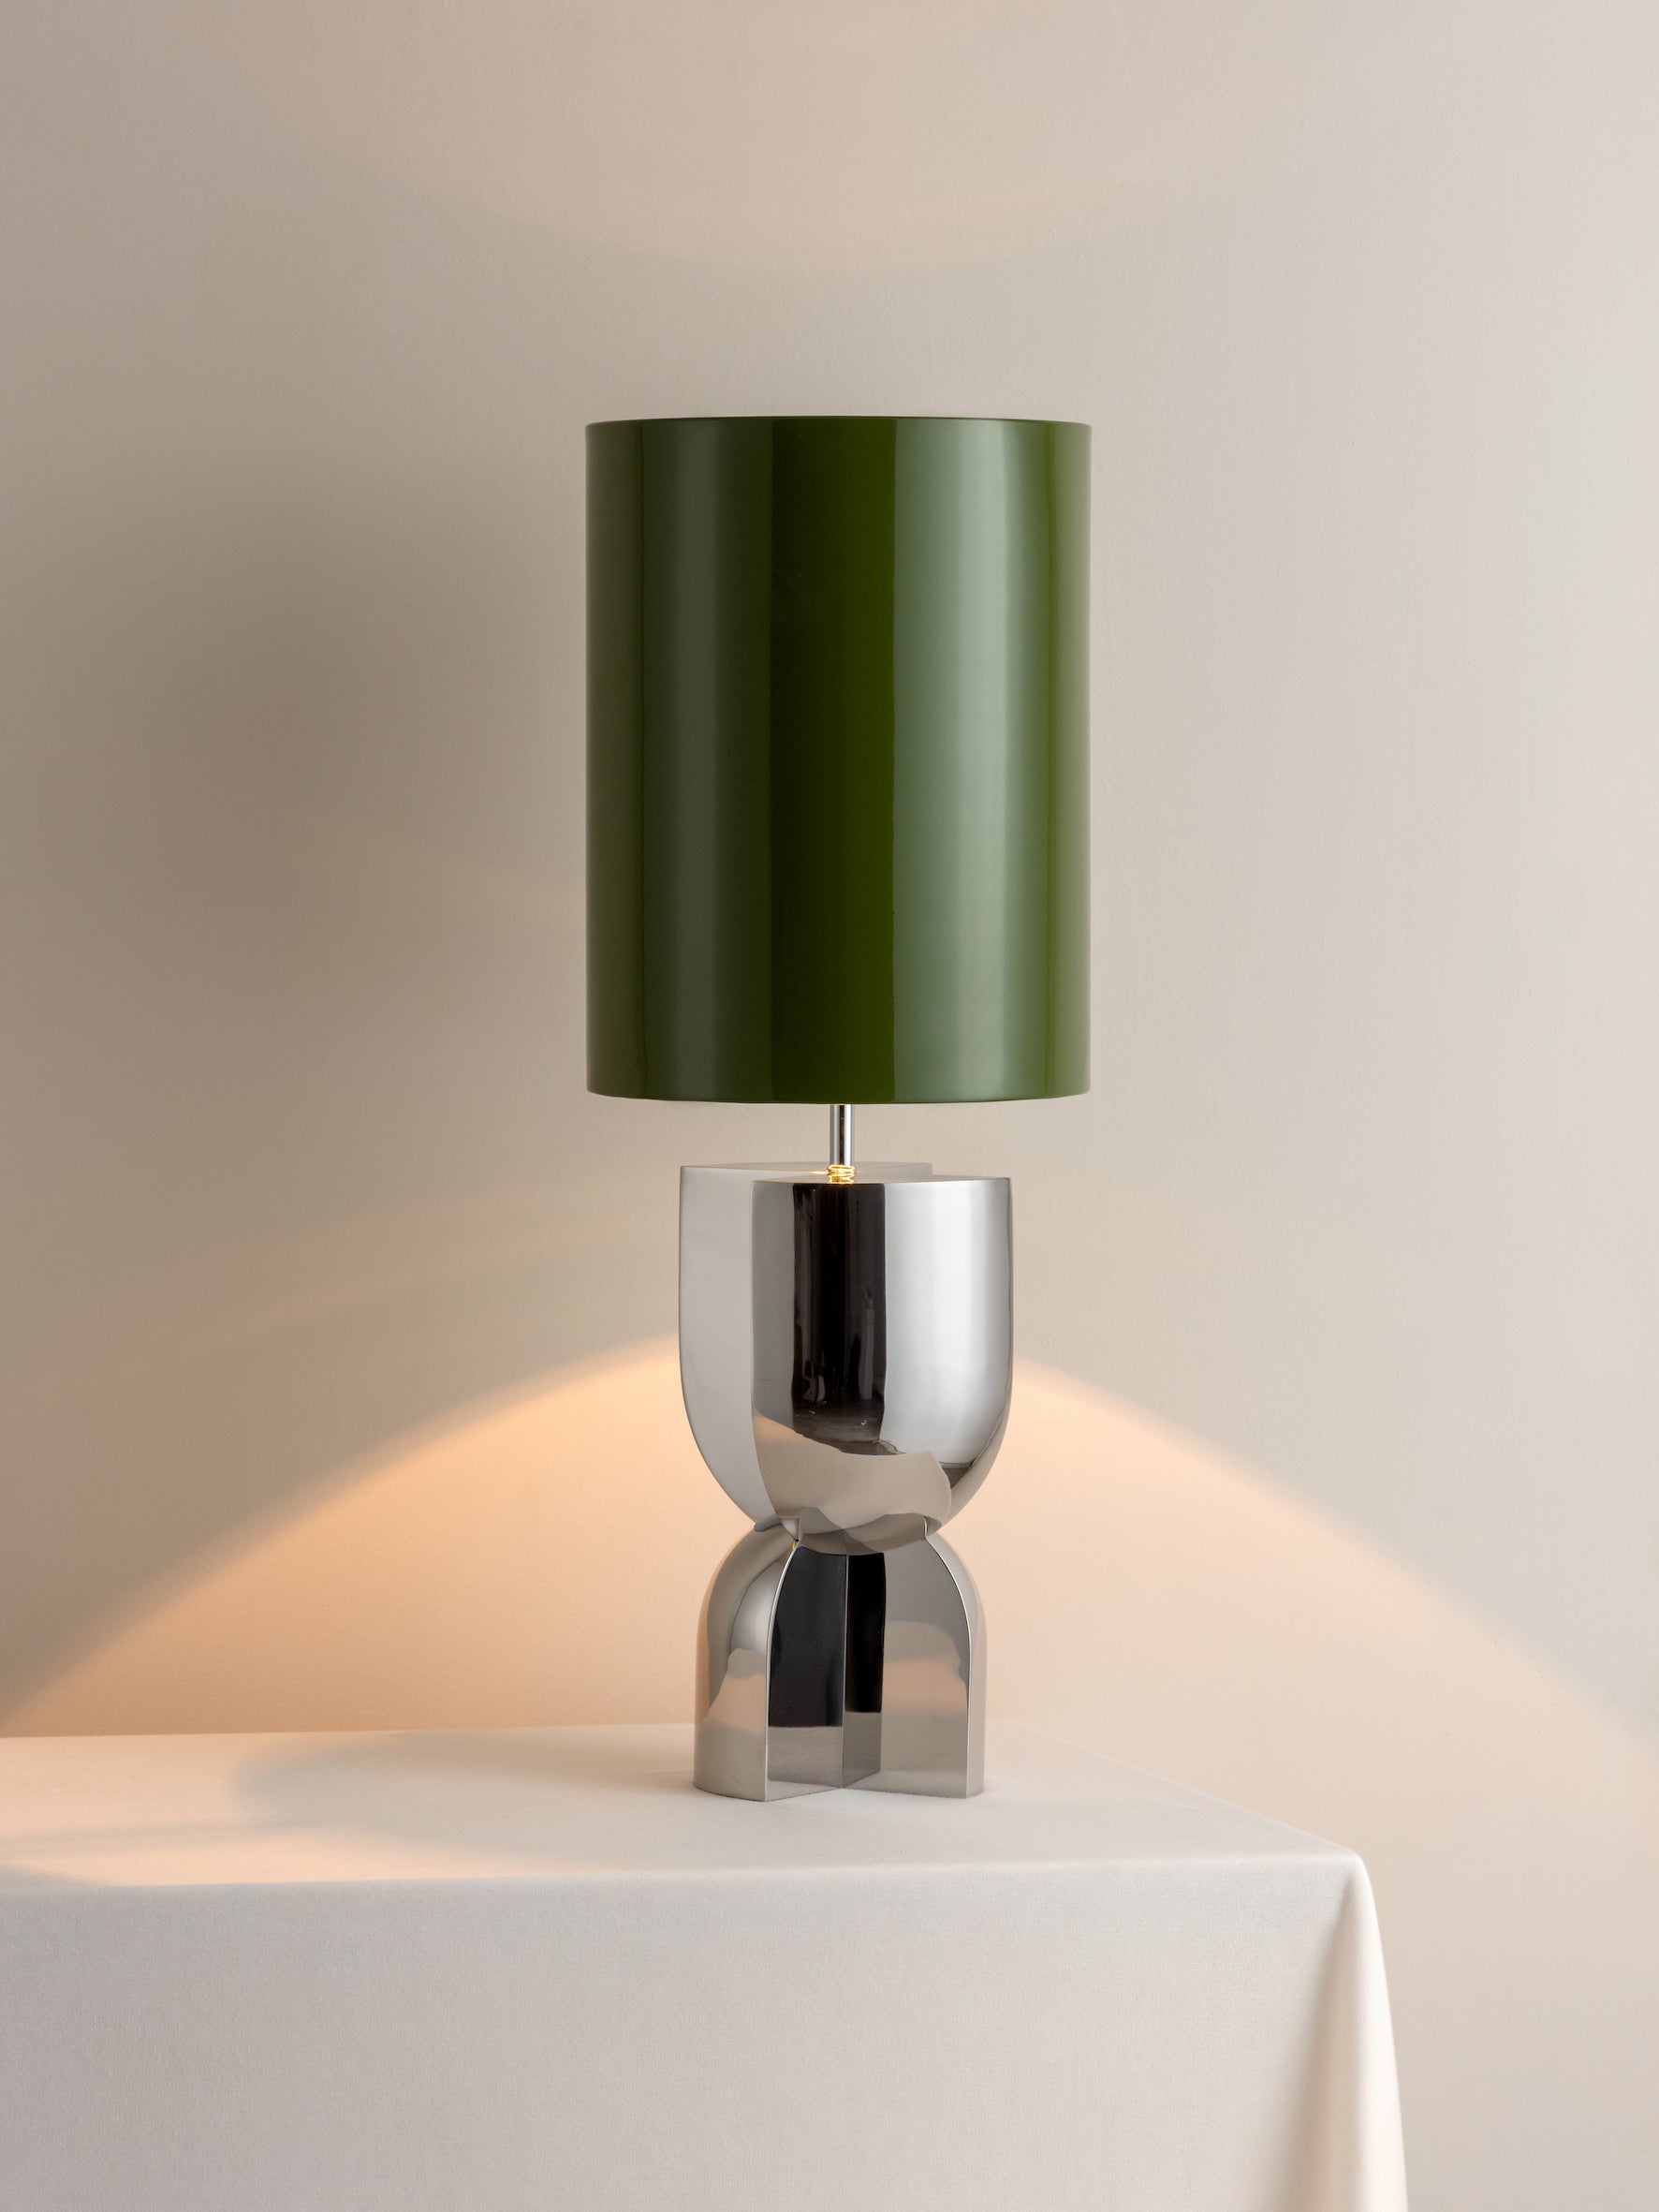 Editions chrome lamp with + green lacquer shade | Table Lamp | Lights & Lamps | UK | Modern Affordable Designer Lighting